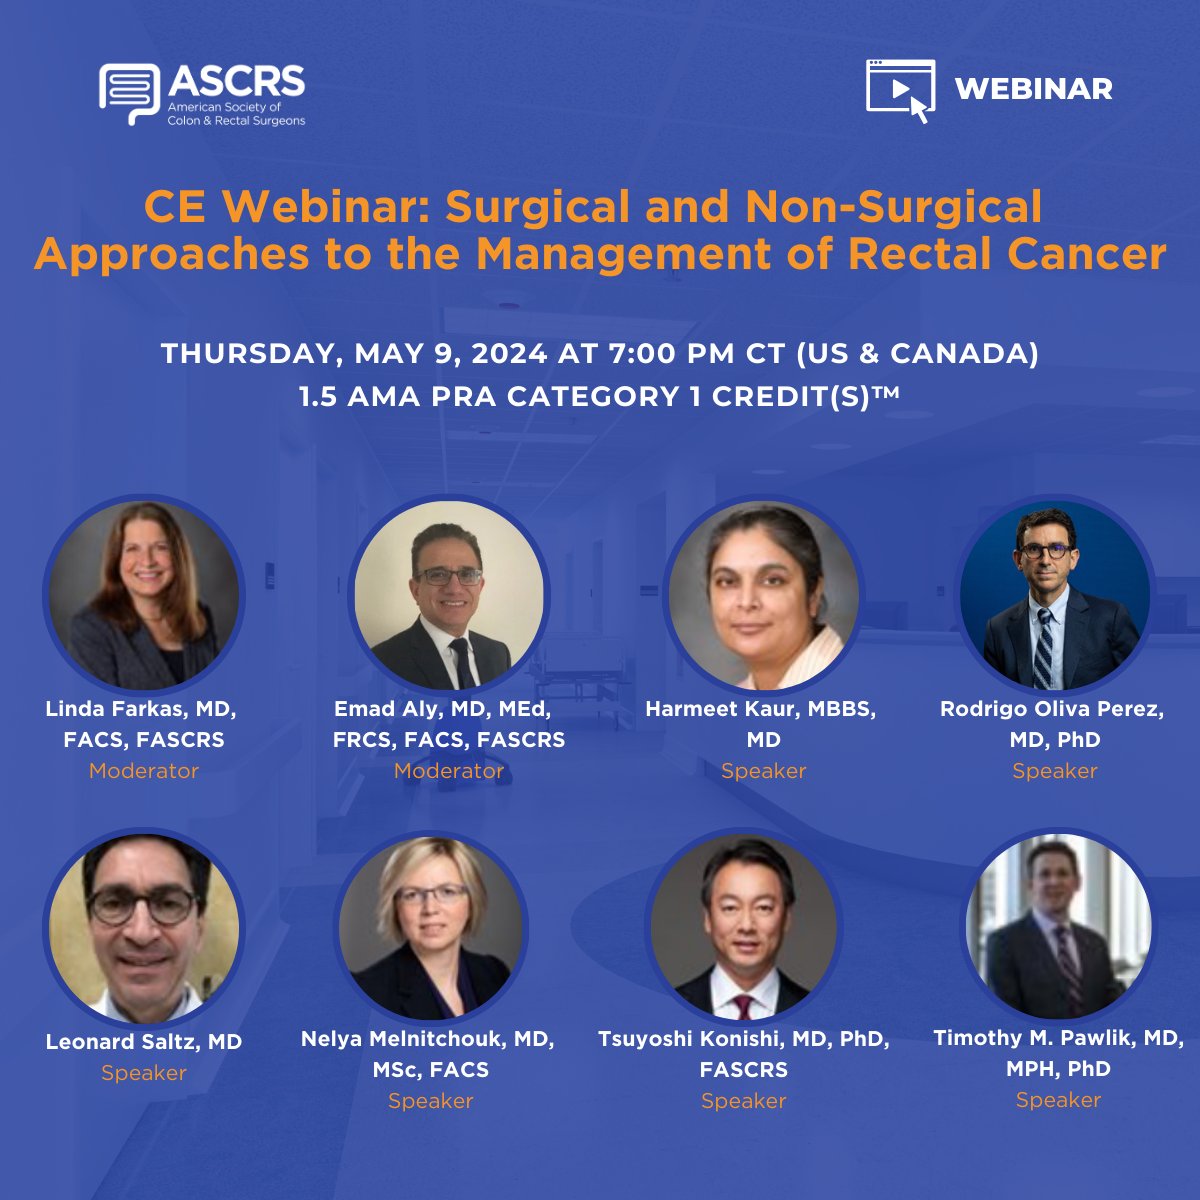 Join us for an insightful webinar discussing the latest in rectal cancer management. Topics include MRI's role in non-operative care, patient selection for organ preservation, and more. Register now: fascrs.org/my-ascrs/educa…